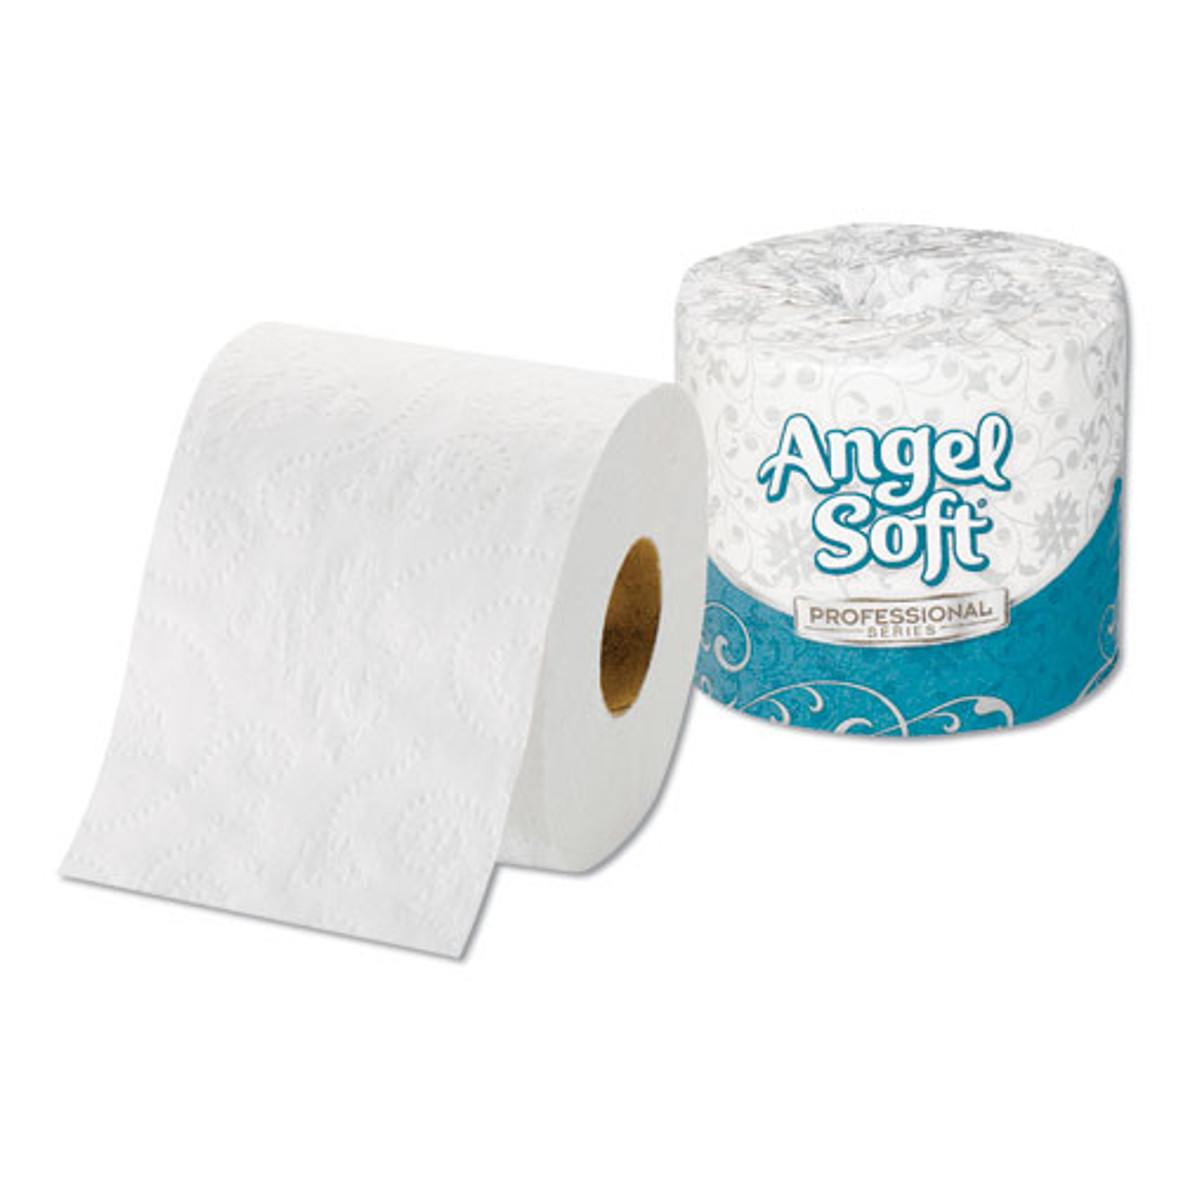 Angel Soft Ps Premium Bathroom Tissue, Septic Safe, 2-ply, White, 450 Sheets/roll, 80 Rolls/carton